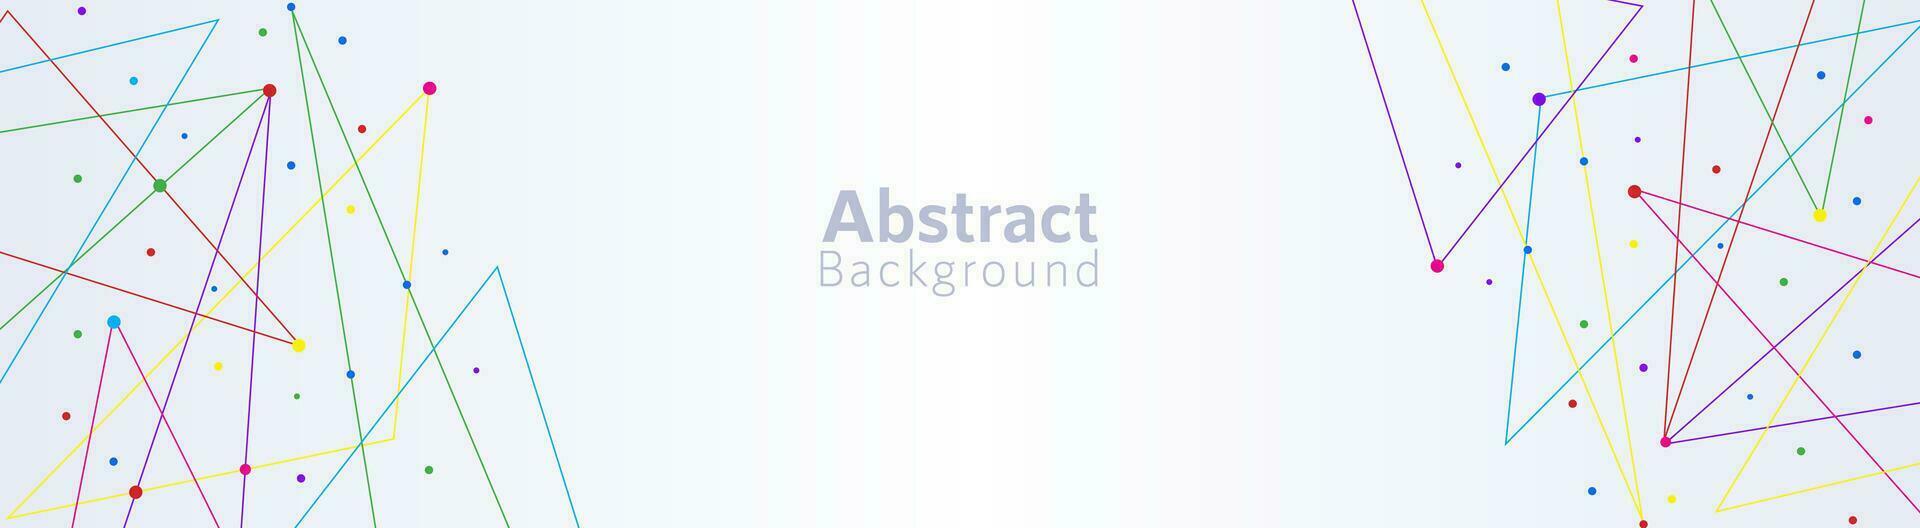 Abstract background with connecting the dots and lines for banner design or header vector